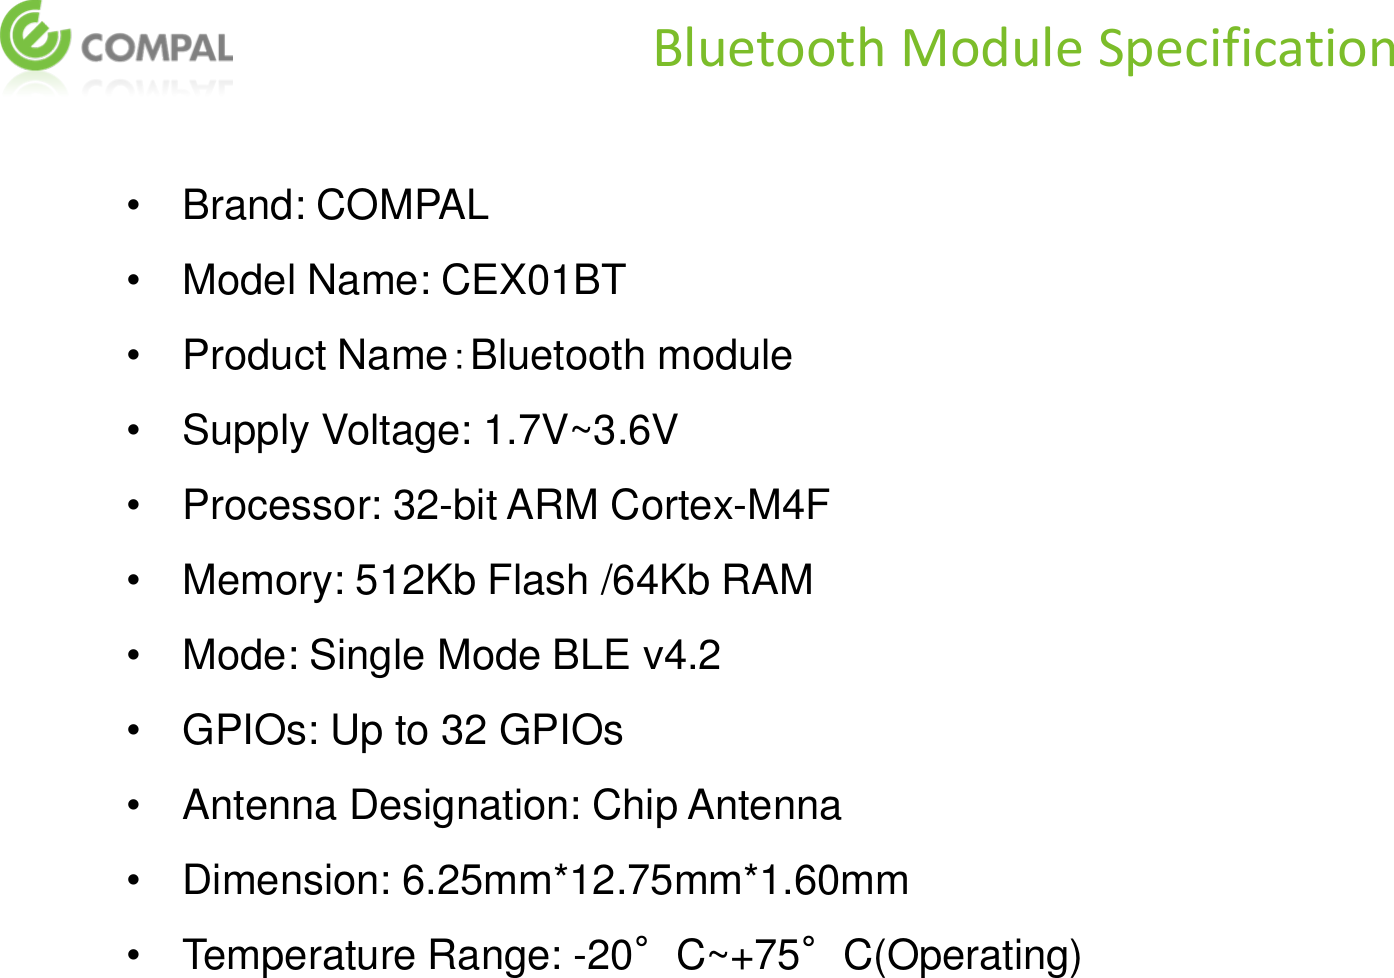 •Brand: COMPAL •Model Name: CEX01BT •Product Name：Bluetooth module  •Supply Voltage: 1.7V~3.6V •Processor: 32-bit ARM Cortex-M4F •Memory: 512Kb Flash /64Kb RAM •Mode: Single Mode BLE v4.2 •GPIOs: Up to 32 GPIOs •Antenna Designation: Chip Antenna •Dimension: 6.25mm*12.75mm*1.60mm •Temperature Range: -20°C~+75°C(Operating)  Bluetooth Module Specification 